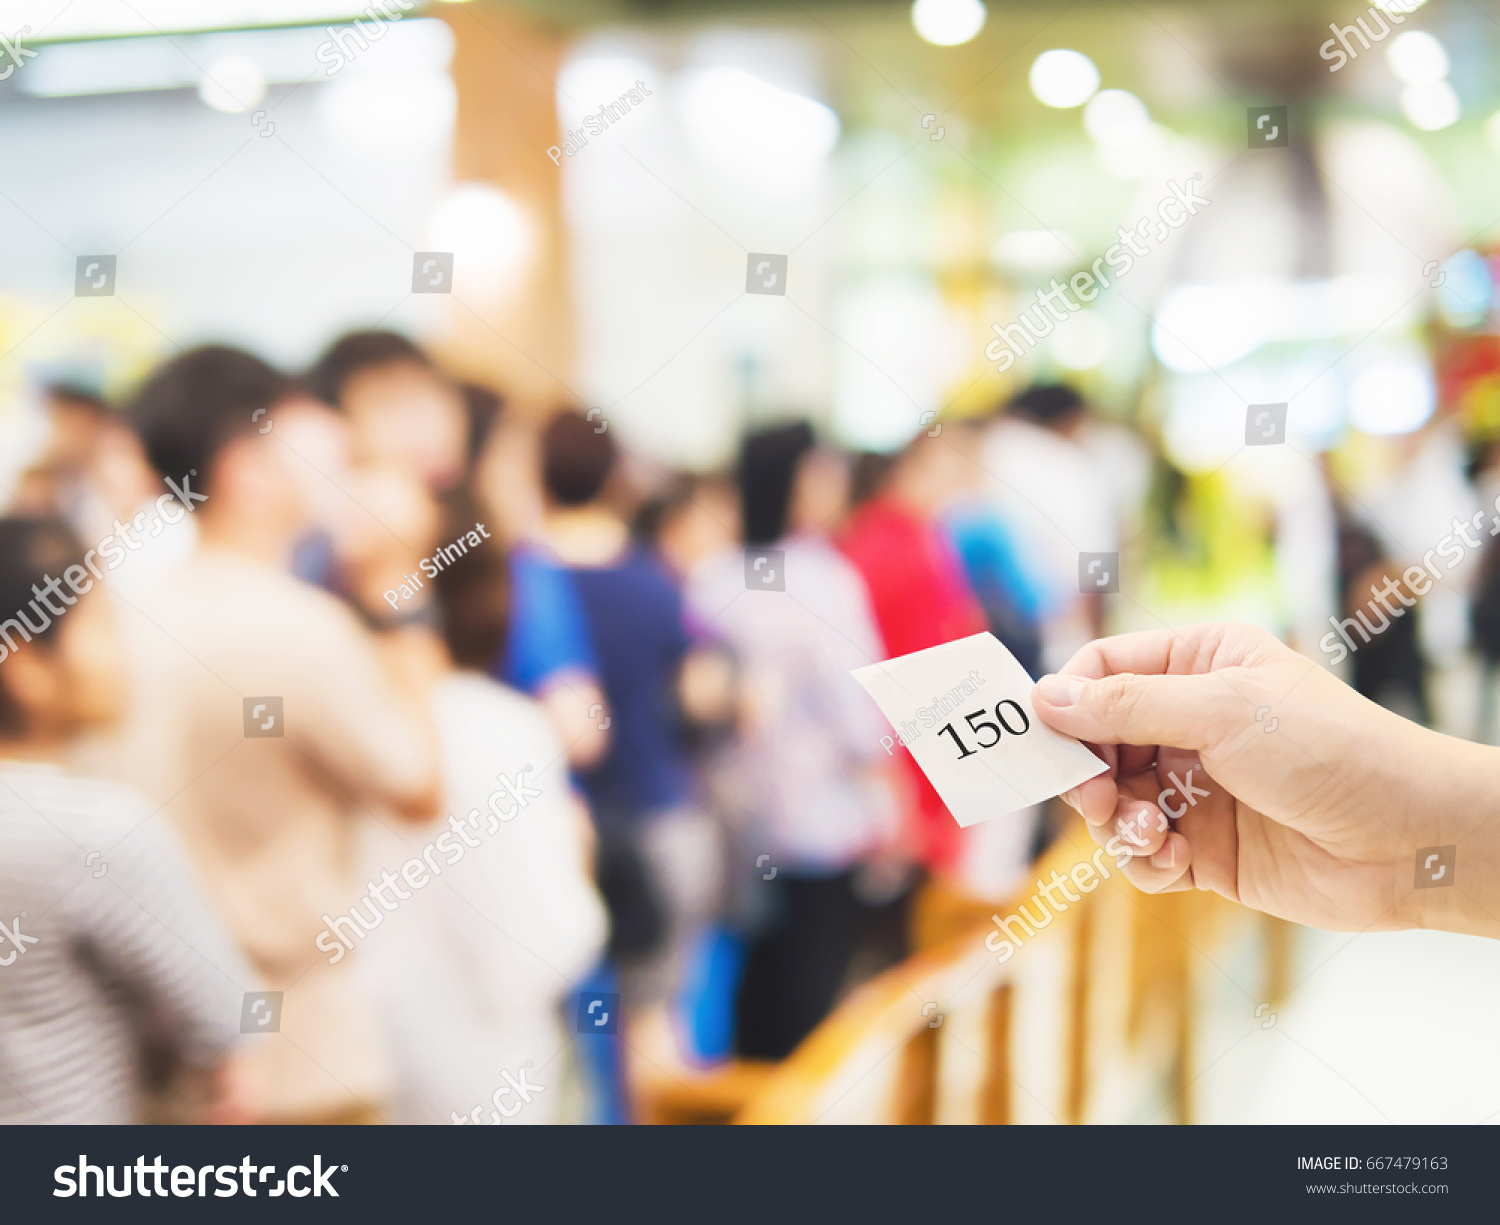 Male hand holding queue card over long line waiting people #667479163